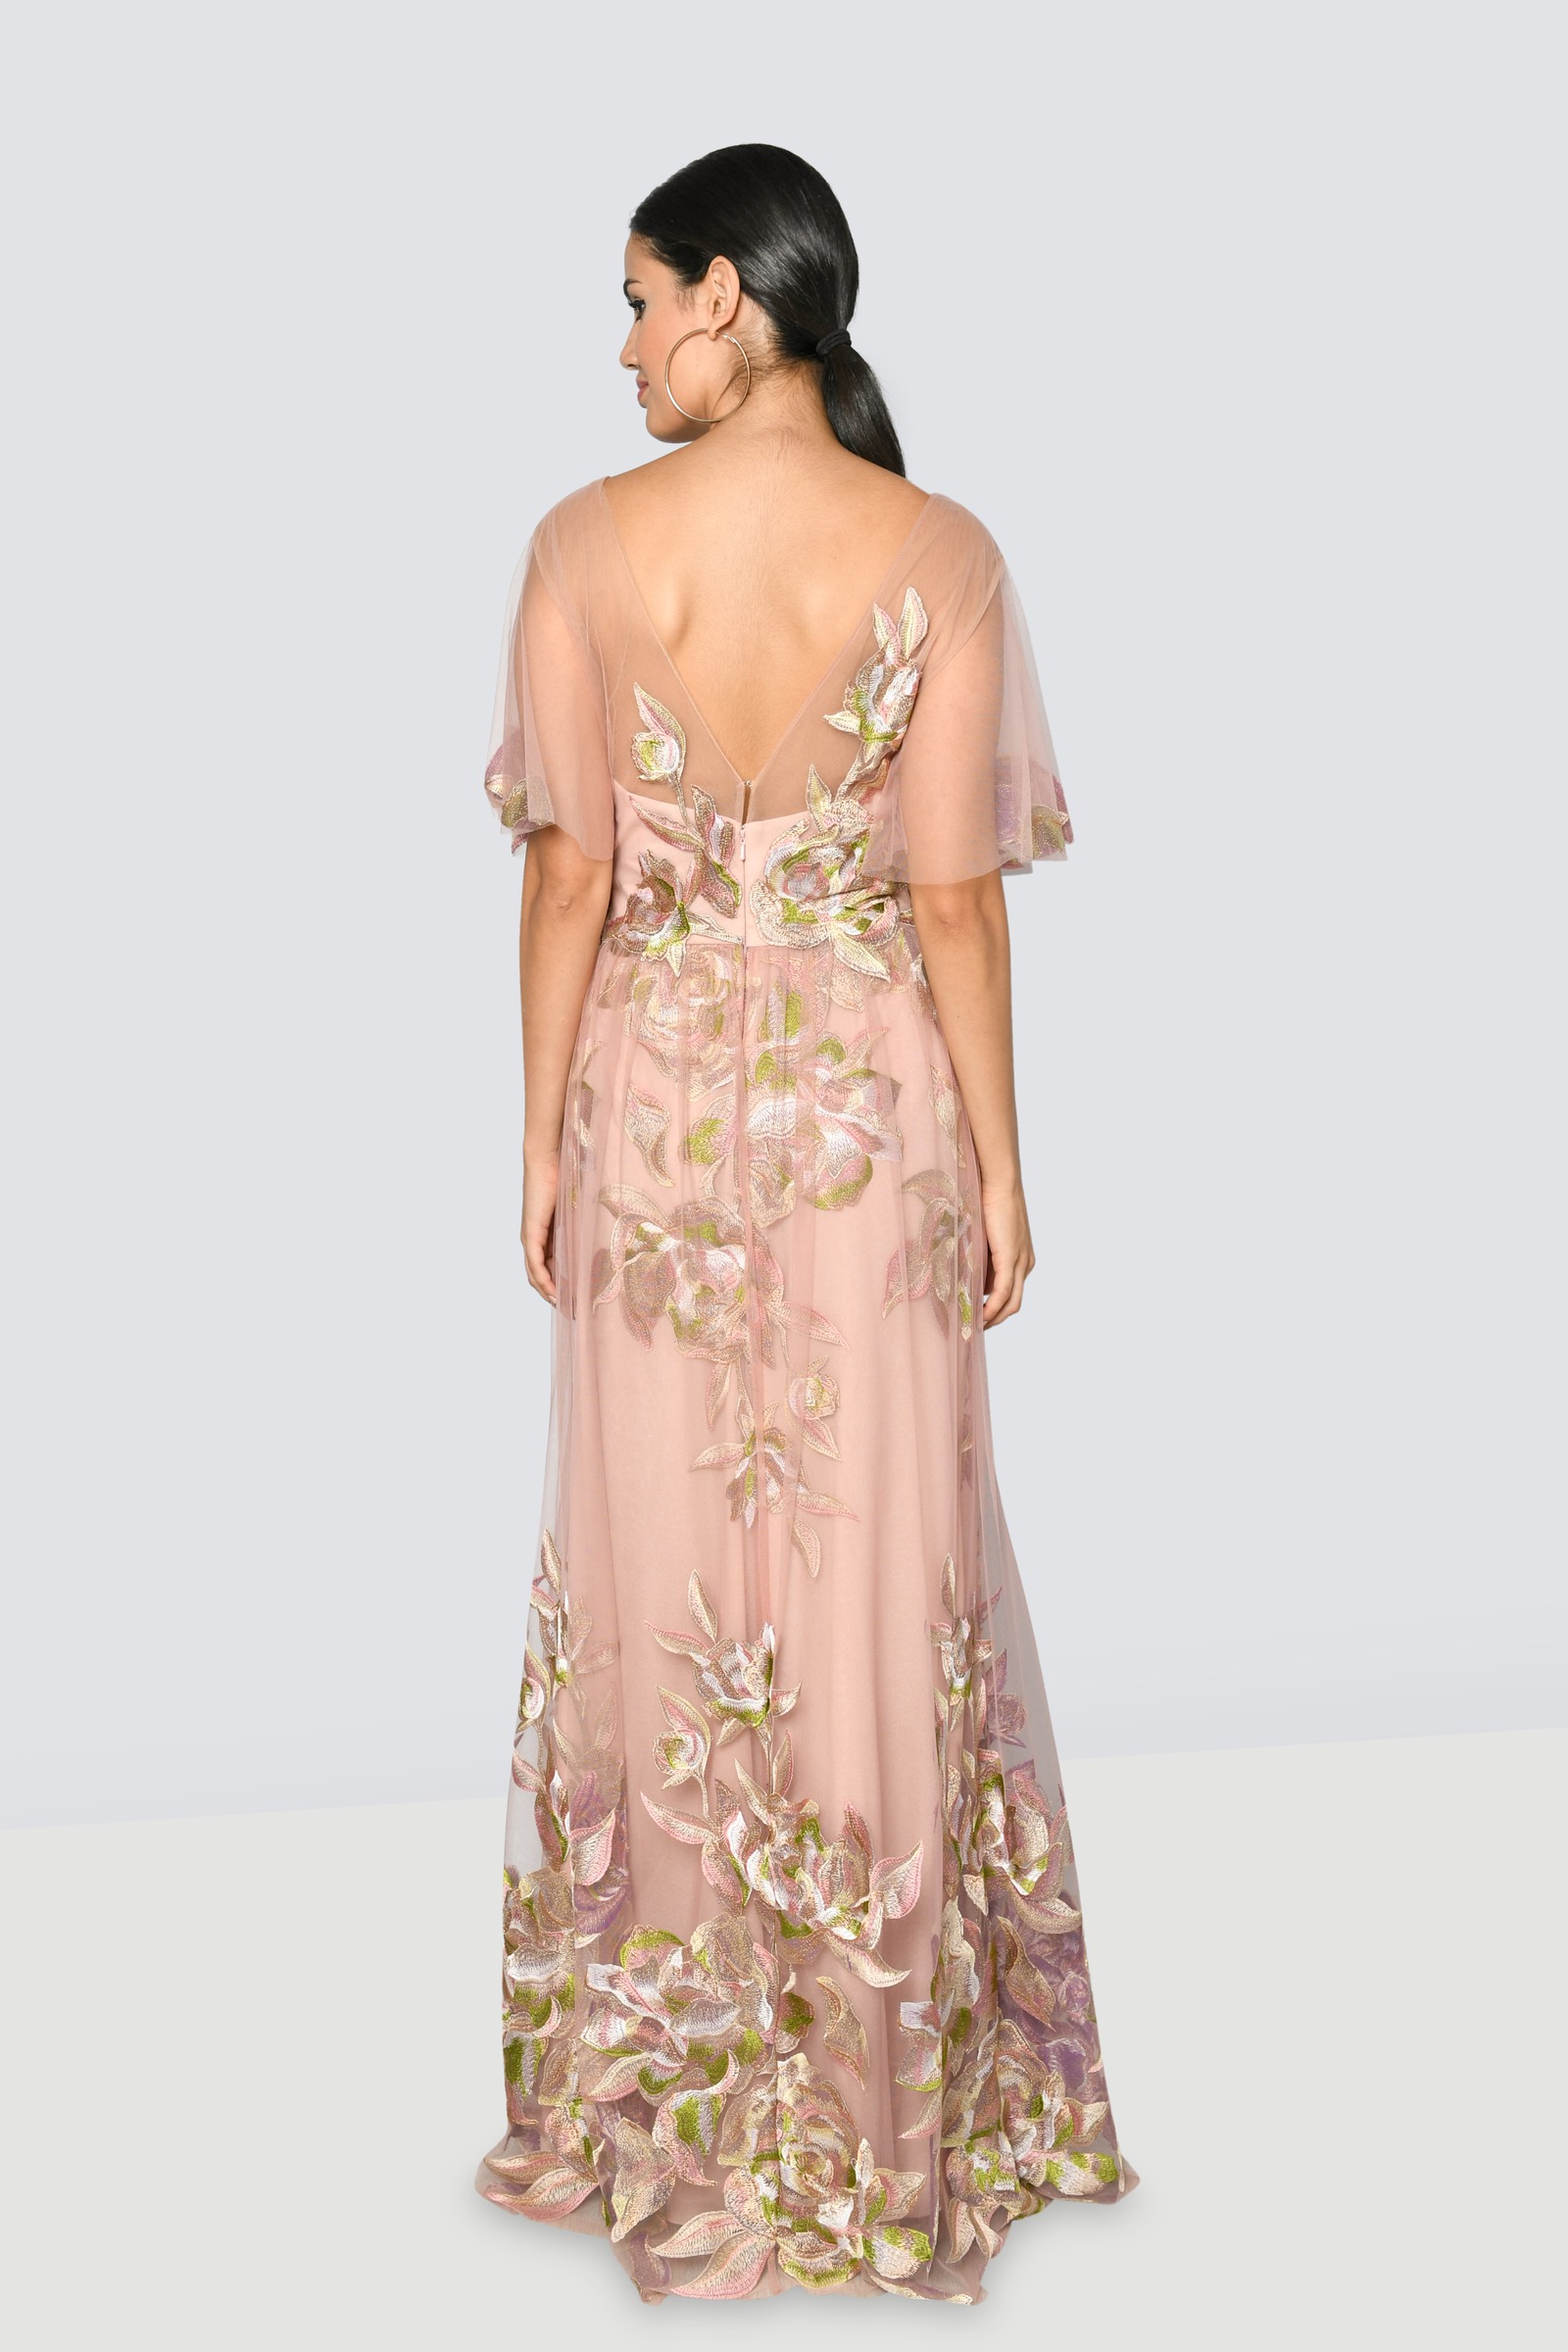 Marchesa Notte Floral-Embroidered Gown Story Rain, 59% OFF